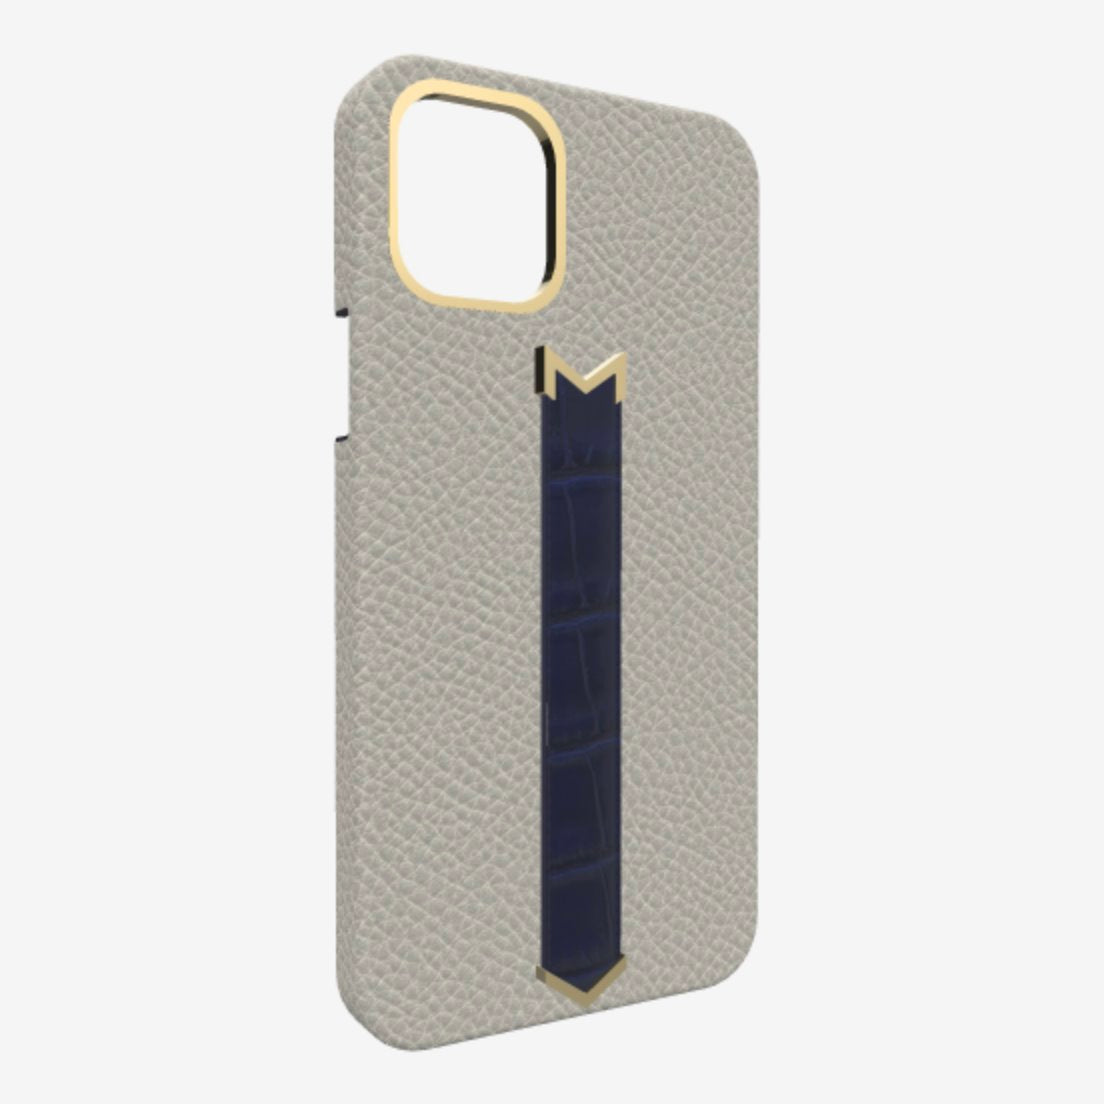 Gold Finger Strap Case for iPhone 13 Pro Max in Genuine Calfskin and Alligator Pearl Grey Navy Blue 